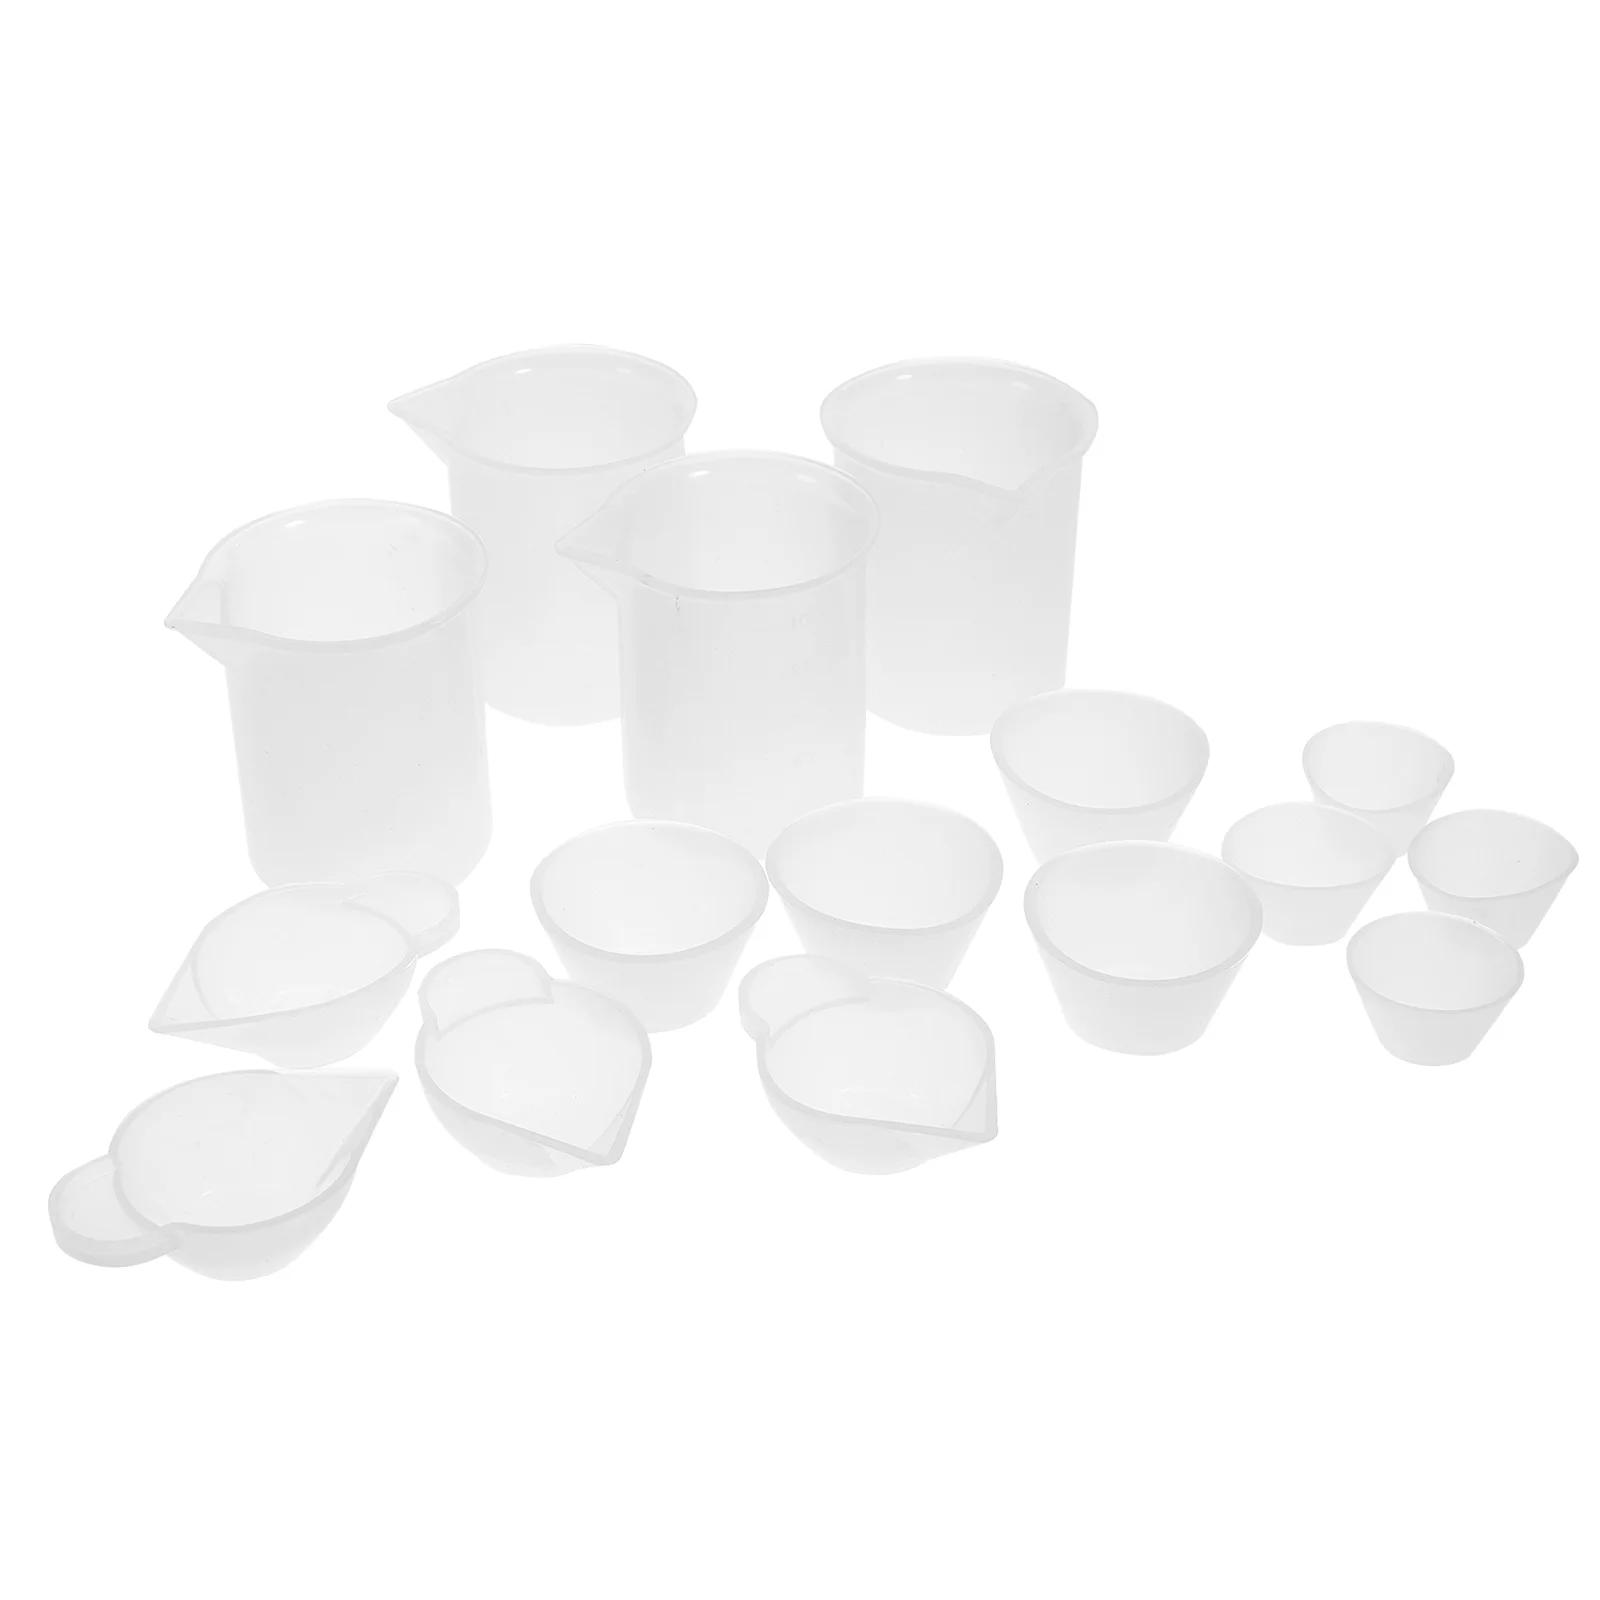 

16 Resin Making Silicone Measuring Cups Pouring Cups for Epoxy Resin Casting Arcrylic Pouring Pigment Mixing